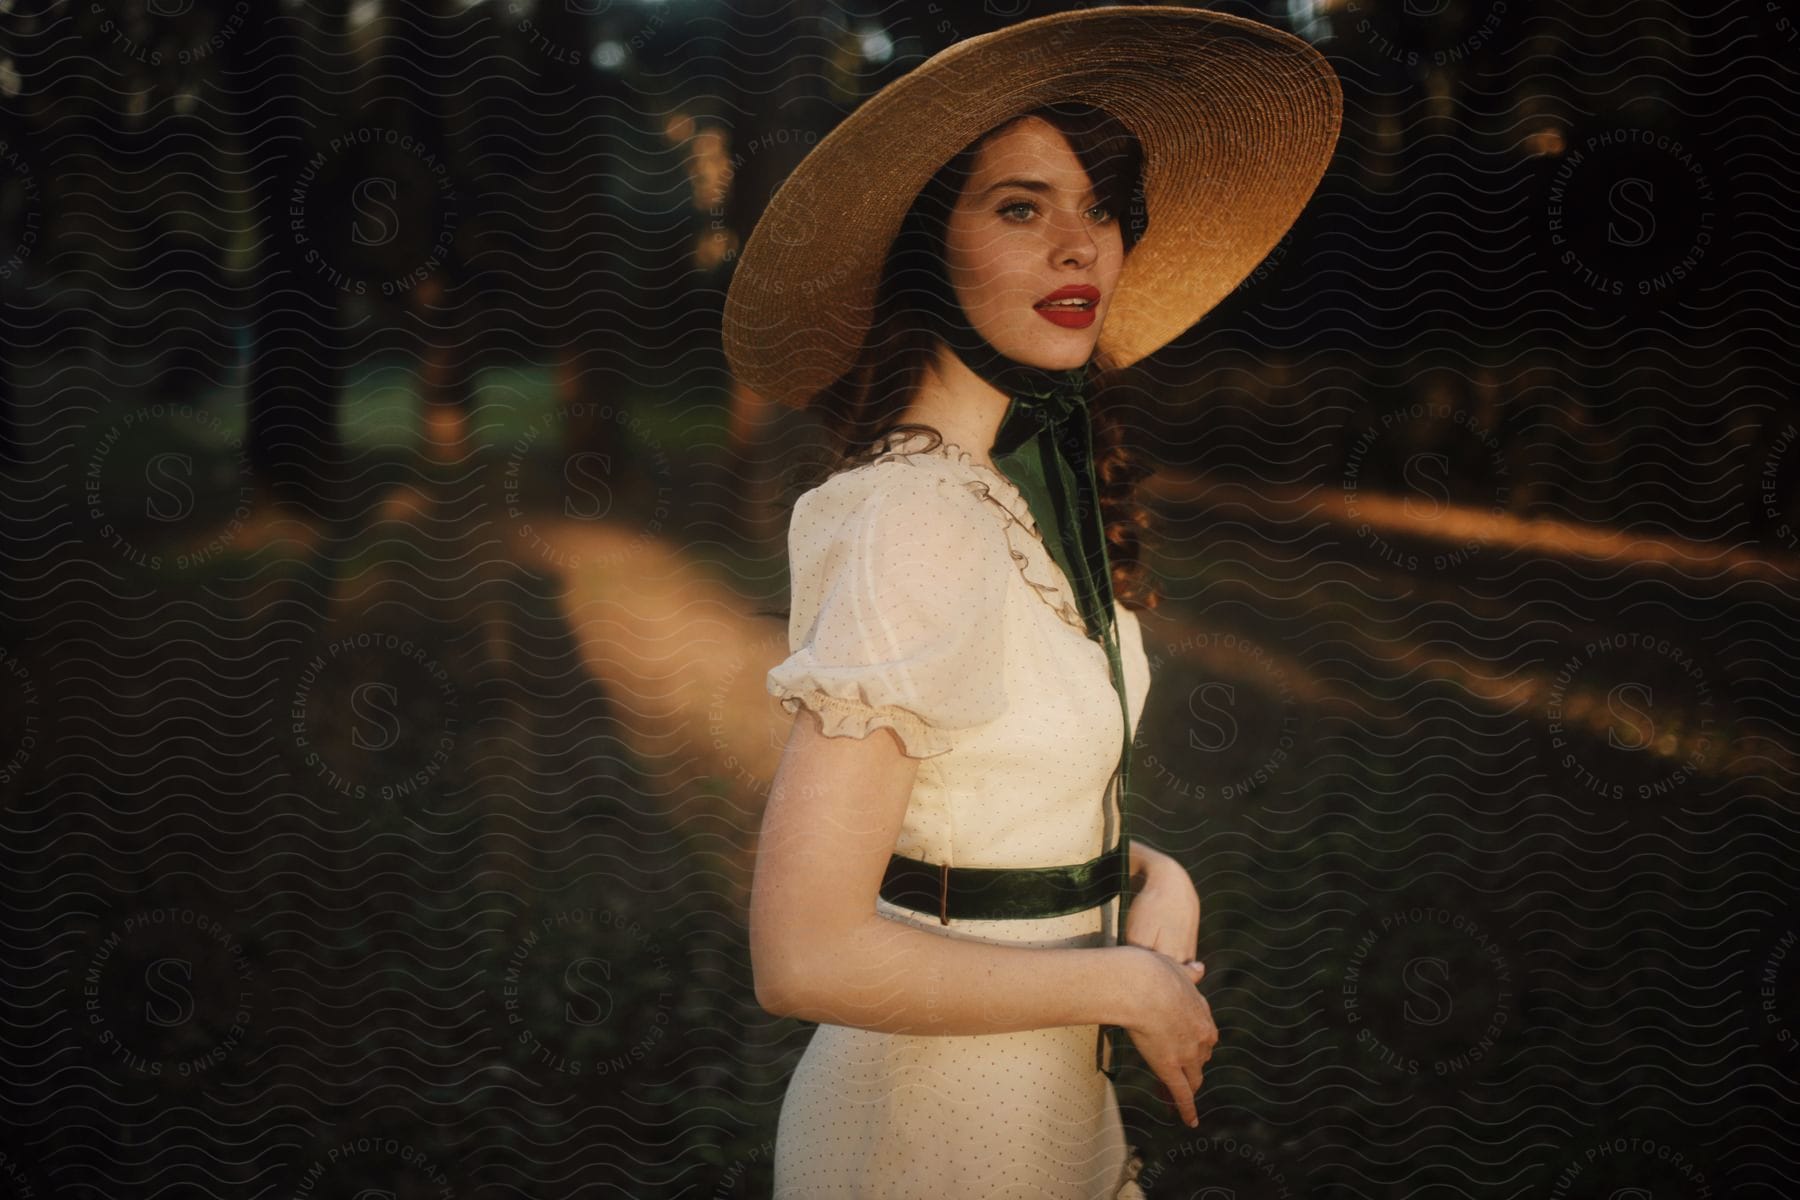 Young model in red lipstick and sun hat wearing a short white dress while standing in a garden surrounded by trees